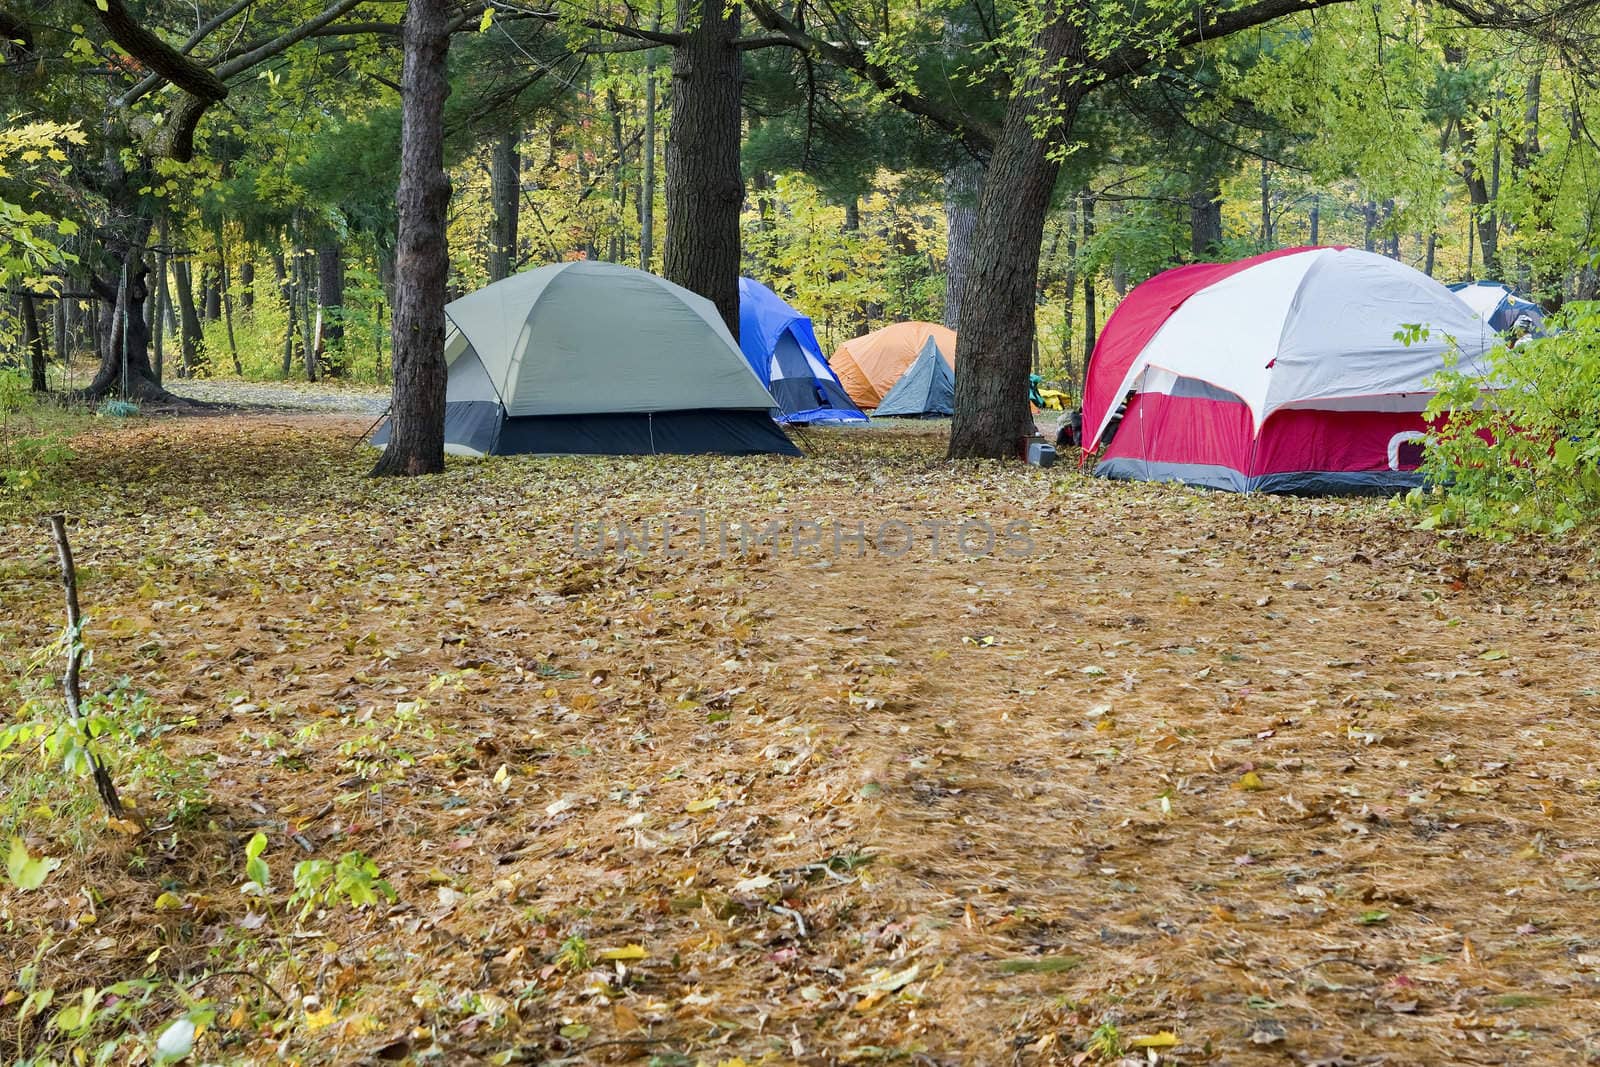 Camping and tents set up in the park.